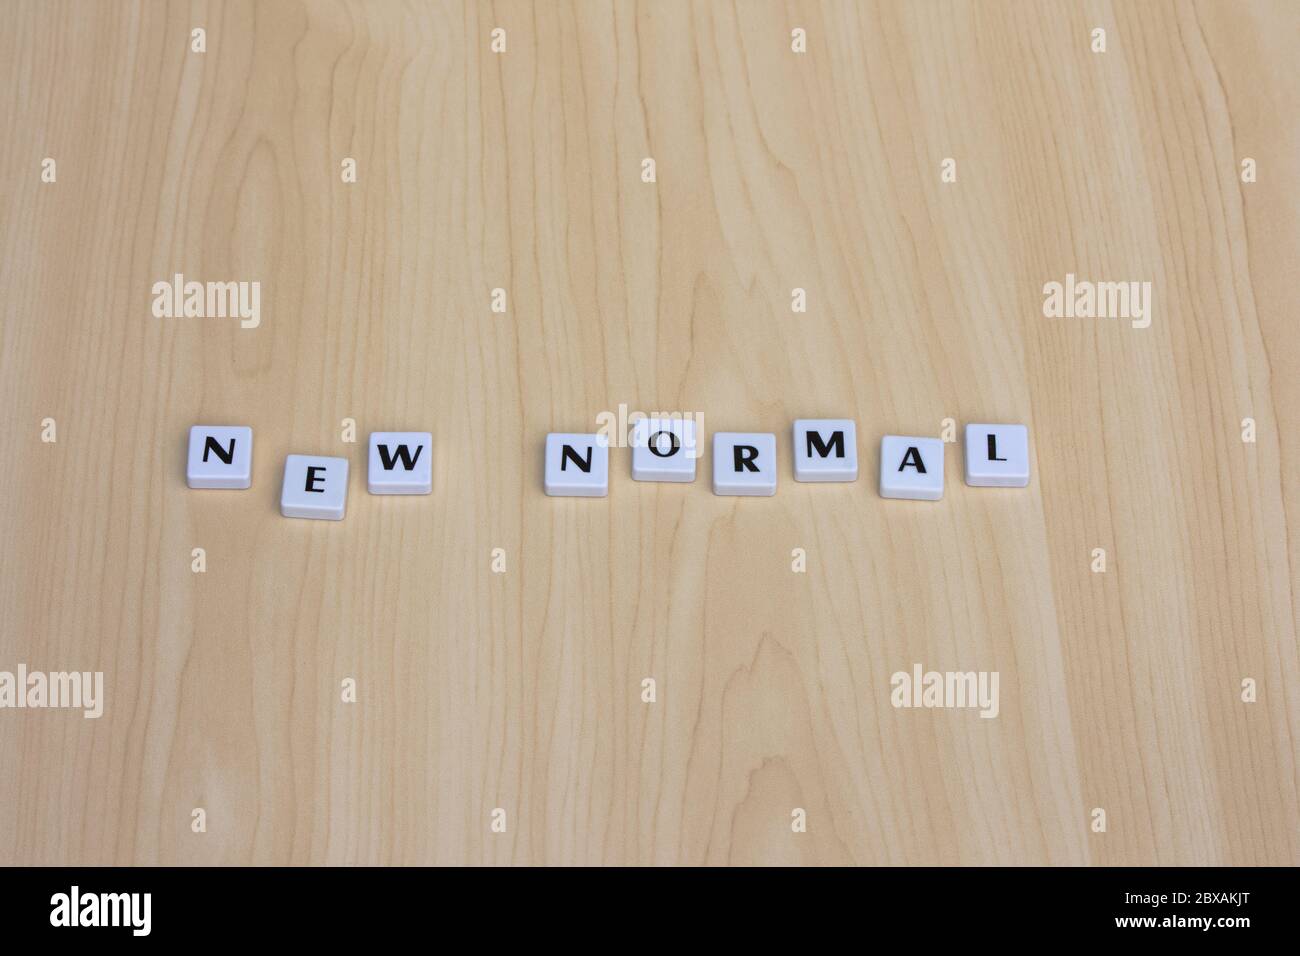 NEW NORMAL word on a wooden background. Concept of new normal after pandemic COVID-19. Stock Photo